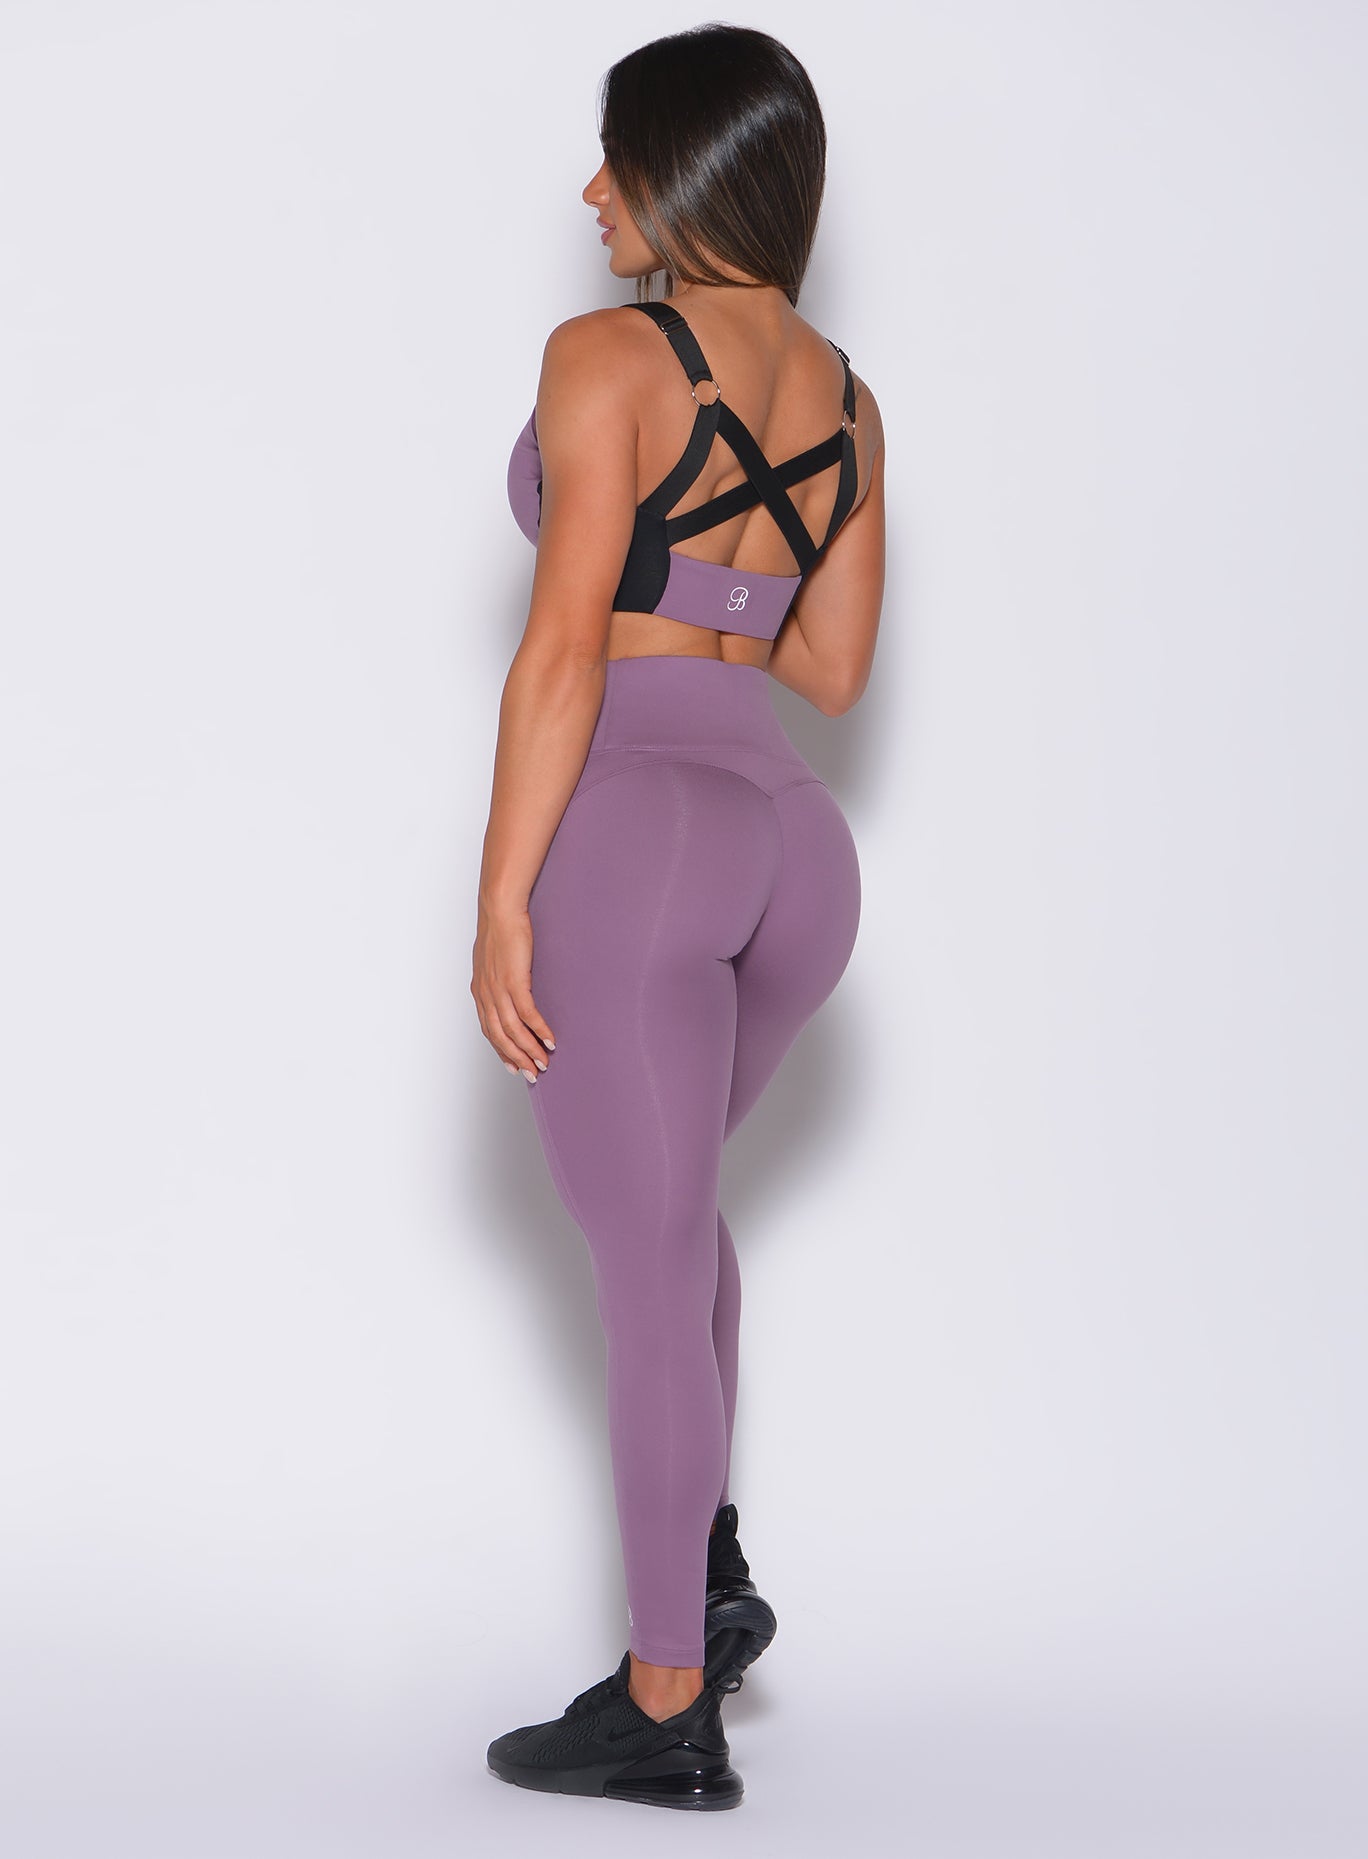 Left side profile view of a model in our snatched waist leggings in violet frost color and a matching bra